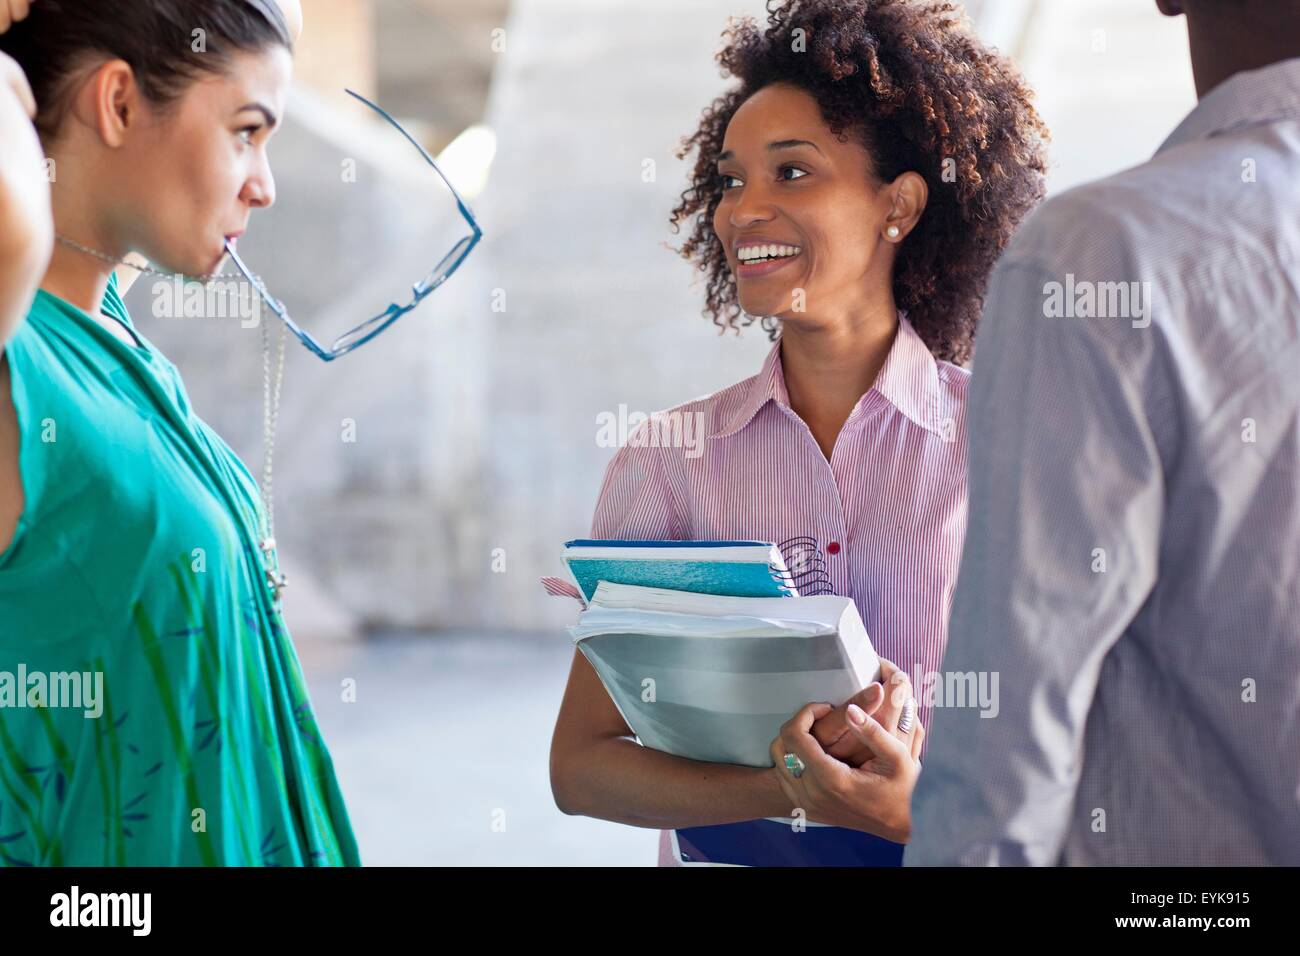 Higher education students Stock Photo